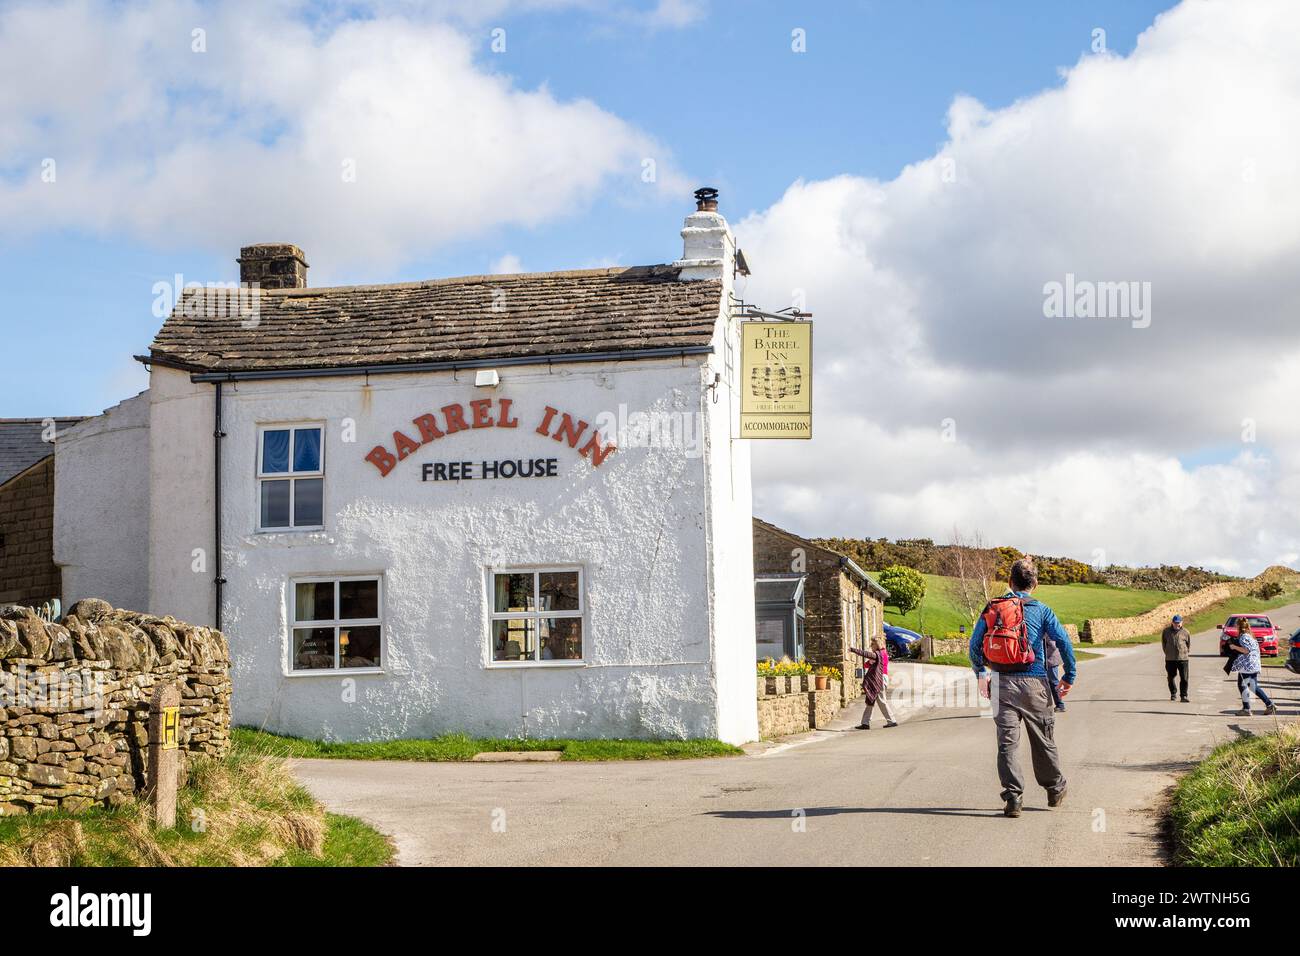 The Barrel Inn at Bretton the highest pub in Derbyshire dates back to 1597 and stands at the head of Bretton Clough in the Peak District National Park Stock Photo